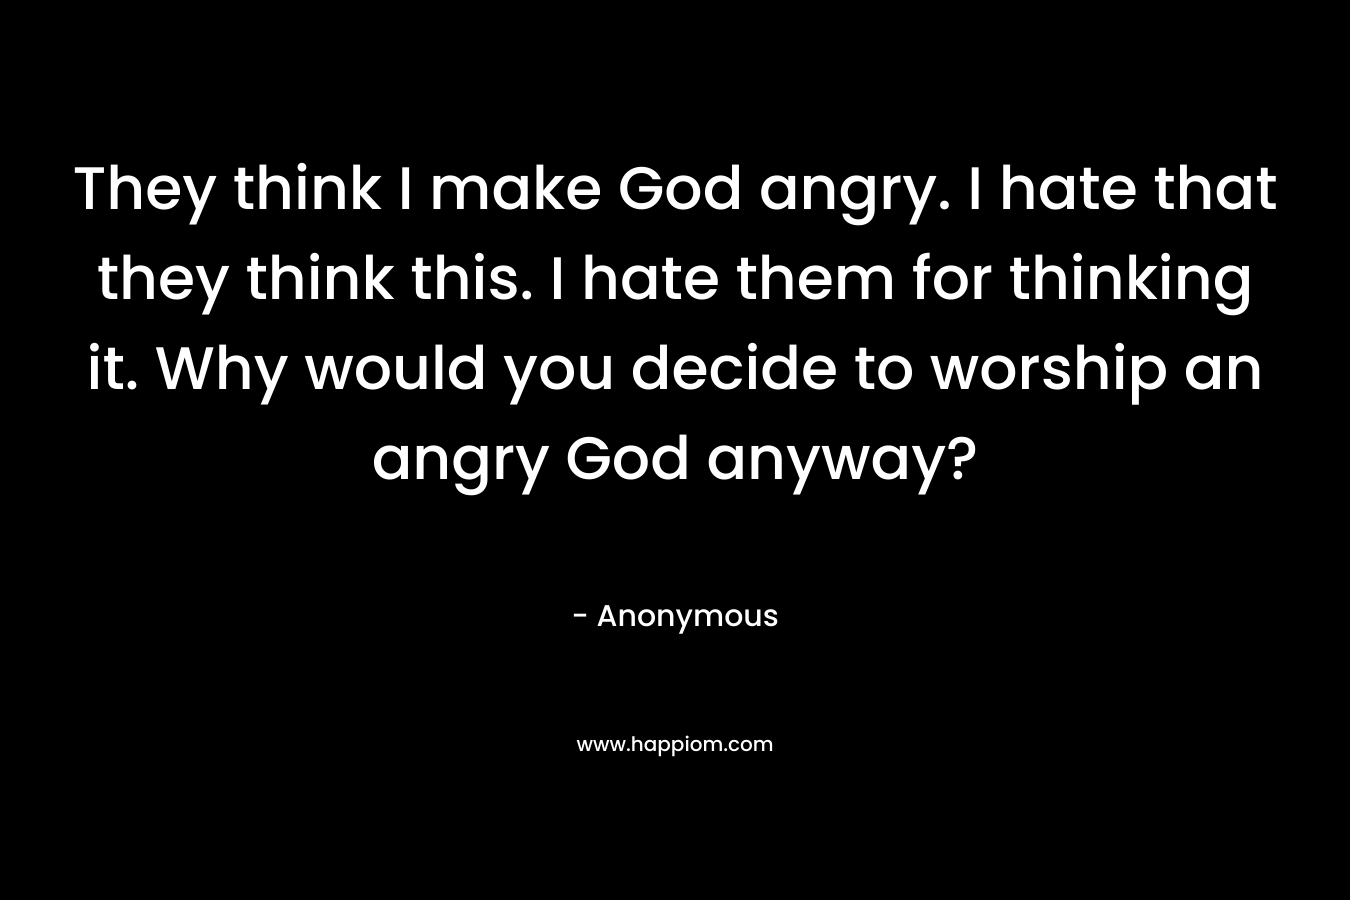 They think I make God angry. I hate that they think this. I hate them for thinking it. Why would you decide to worship an angry God anyway?